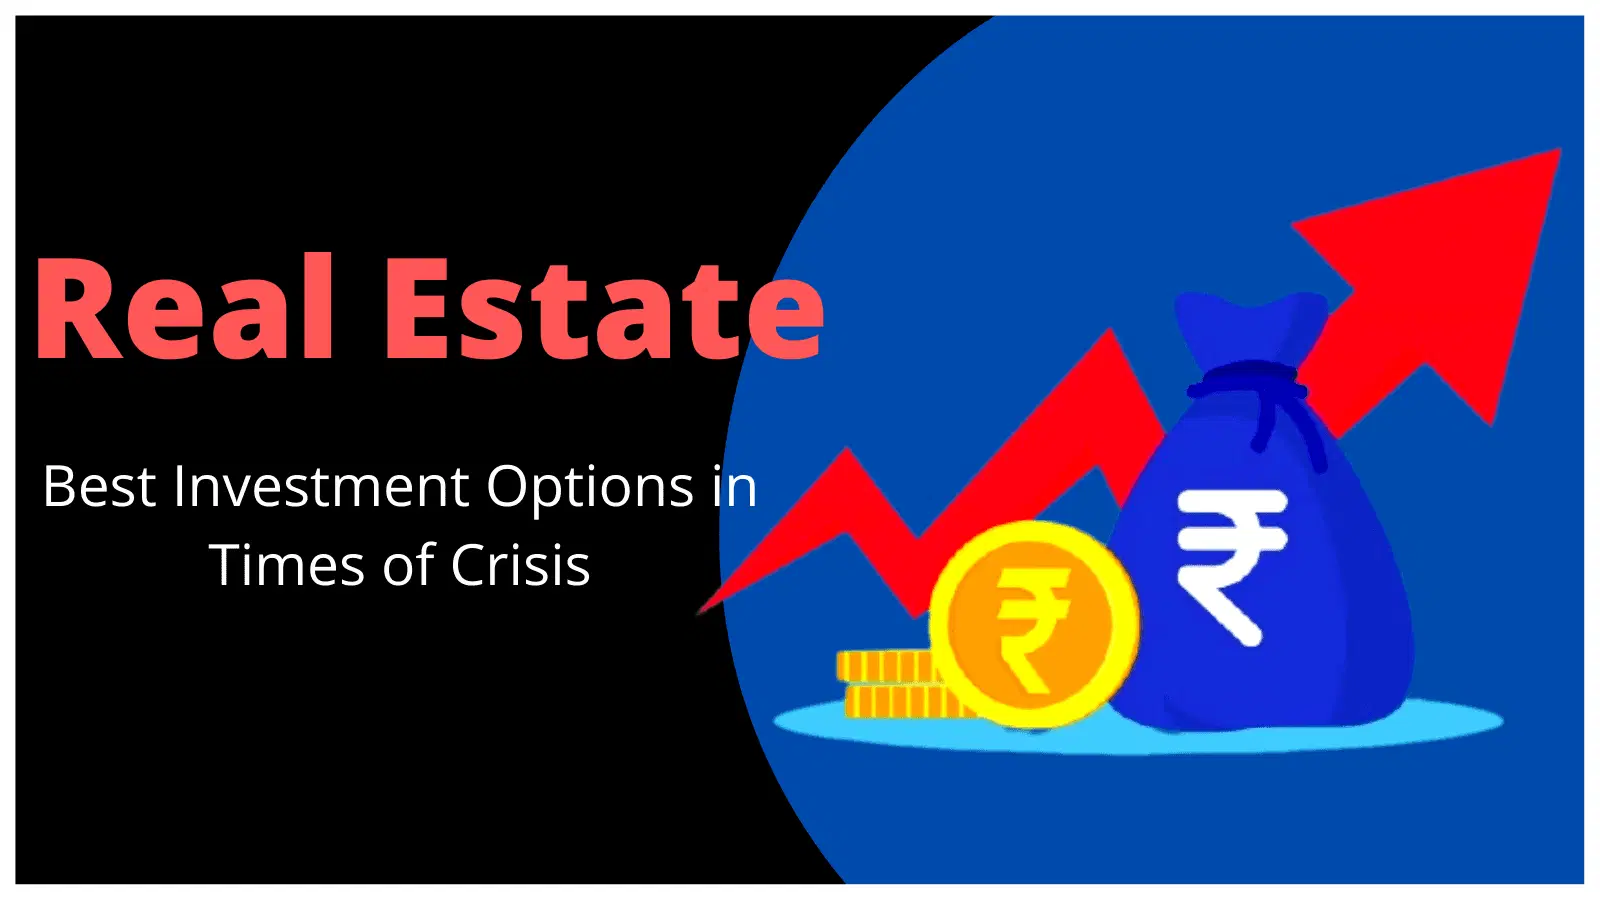 Best Investment Options in Times of Crisis